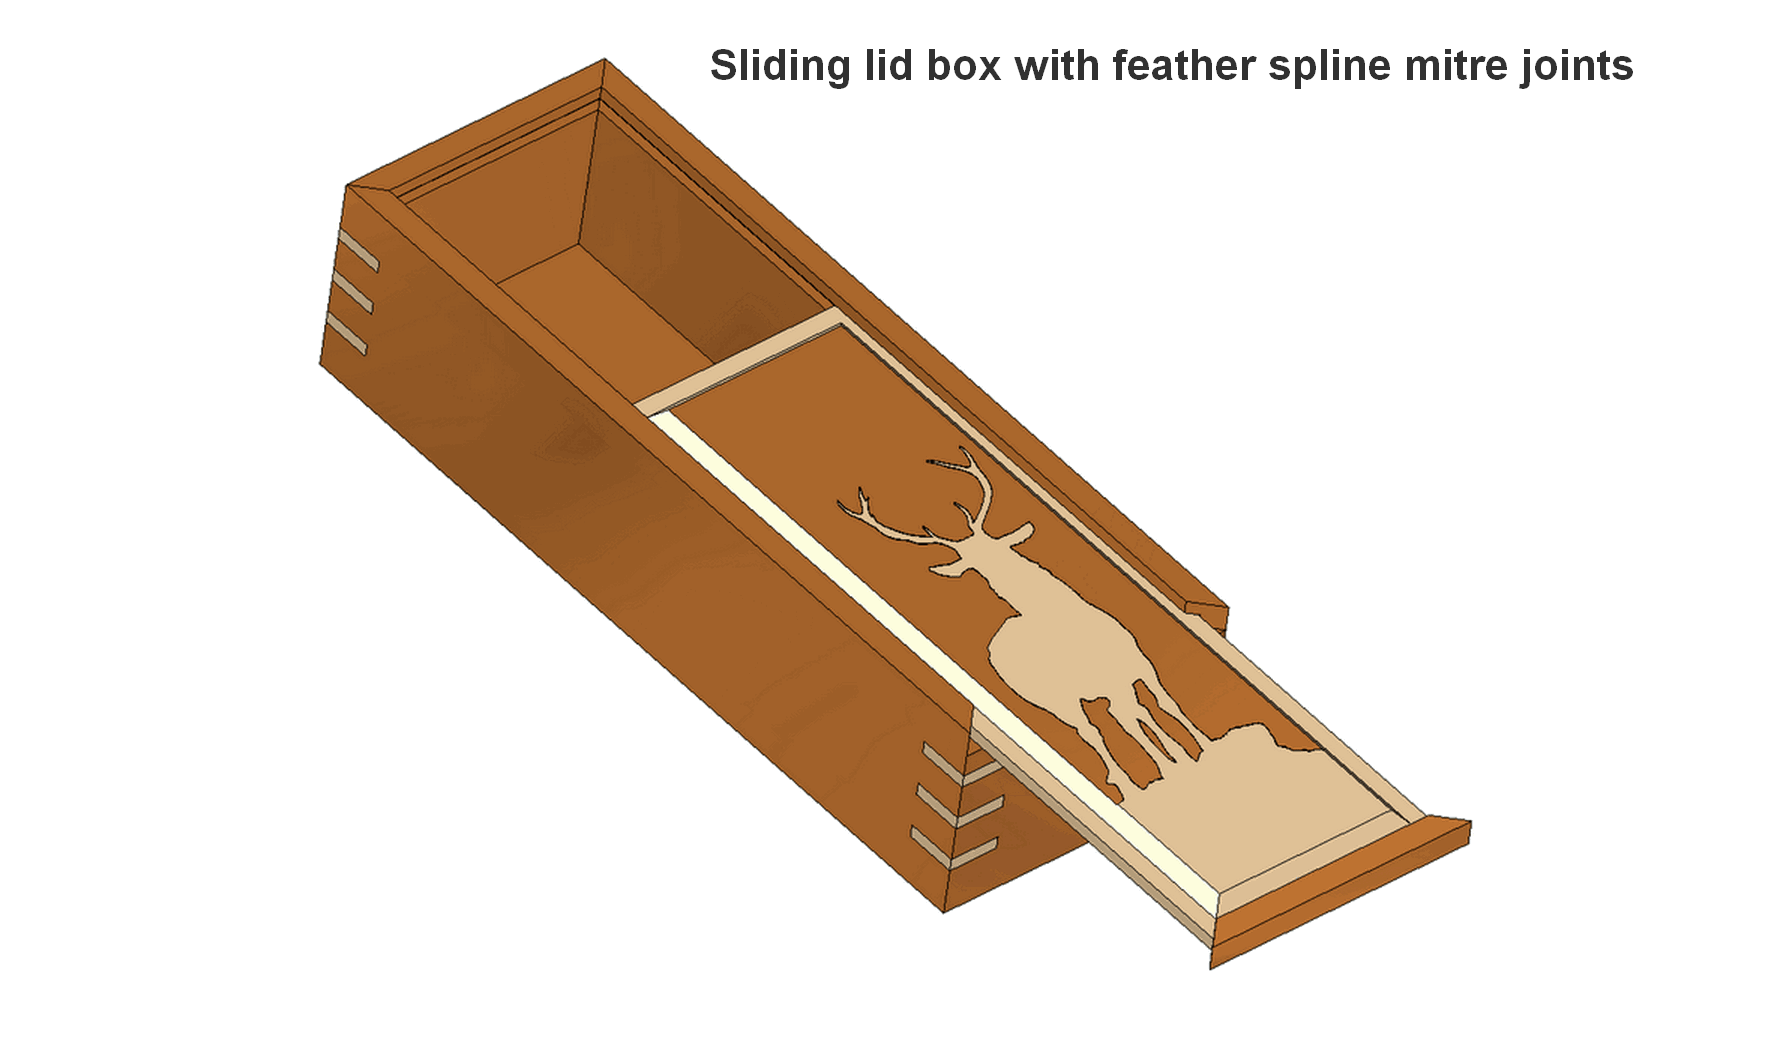 Sliding lid box with spline mitre woodworking joints plan